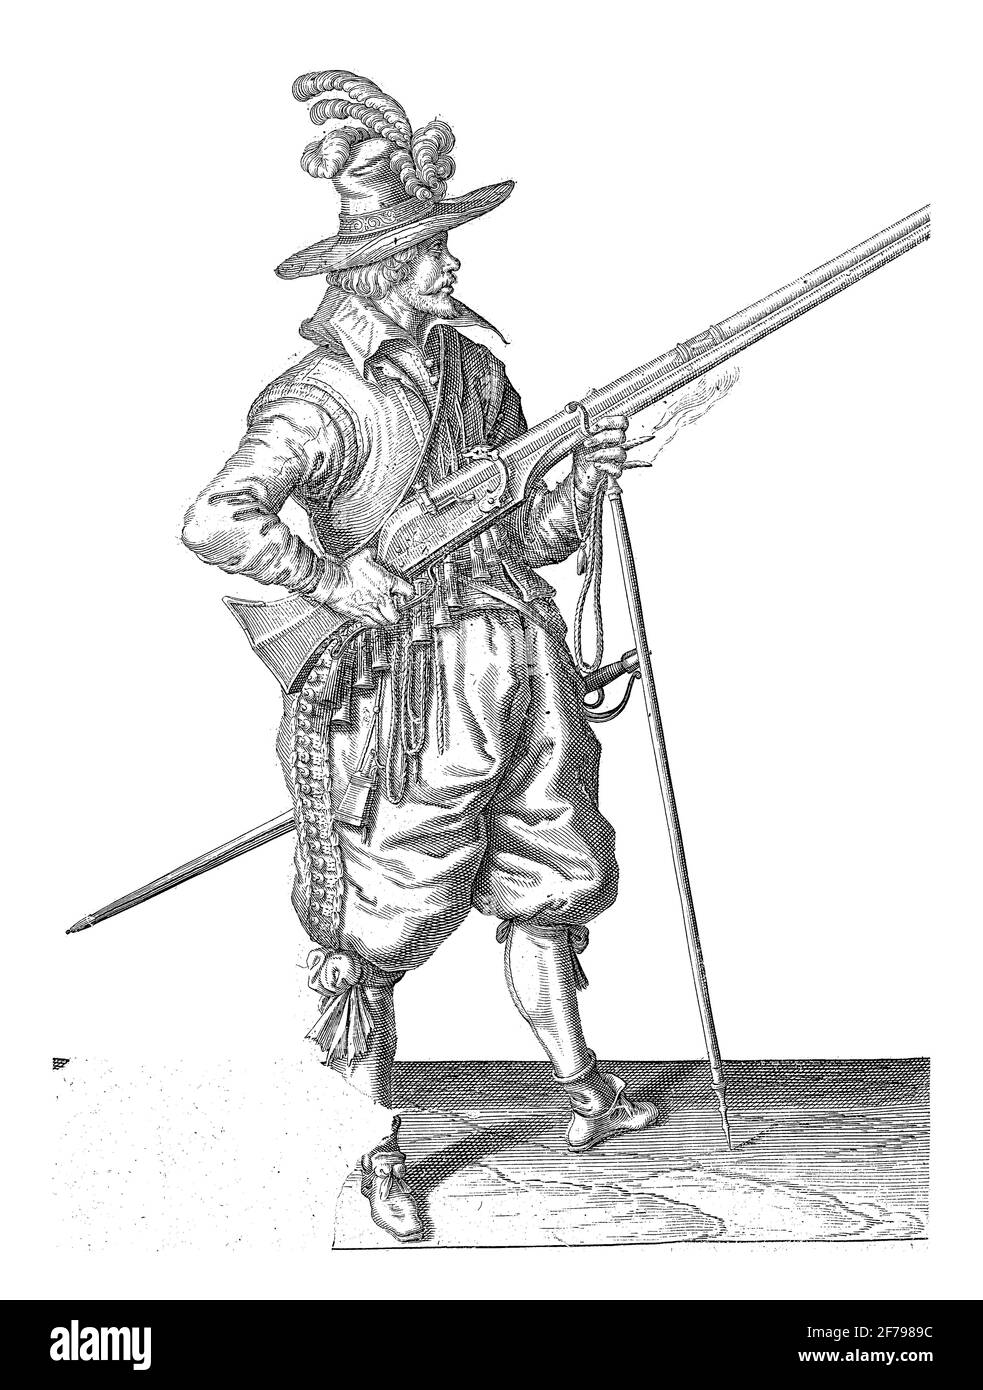 Guardian Soldier Holding His Musket at an Angle Right Side, Finger on the Trigger, vintage engraving. Stock Photo